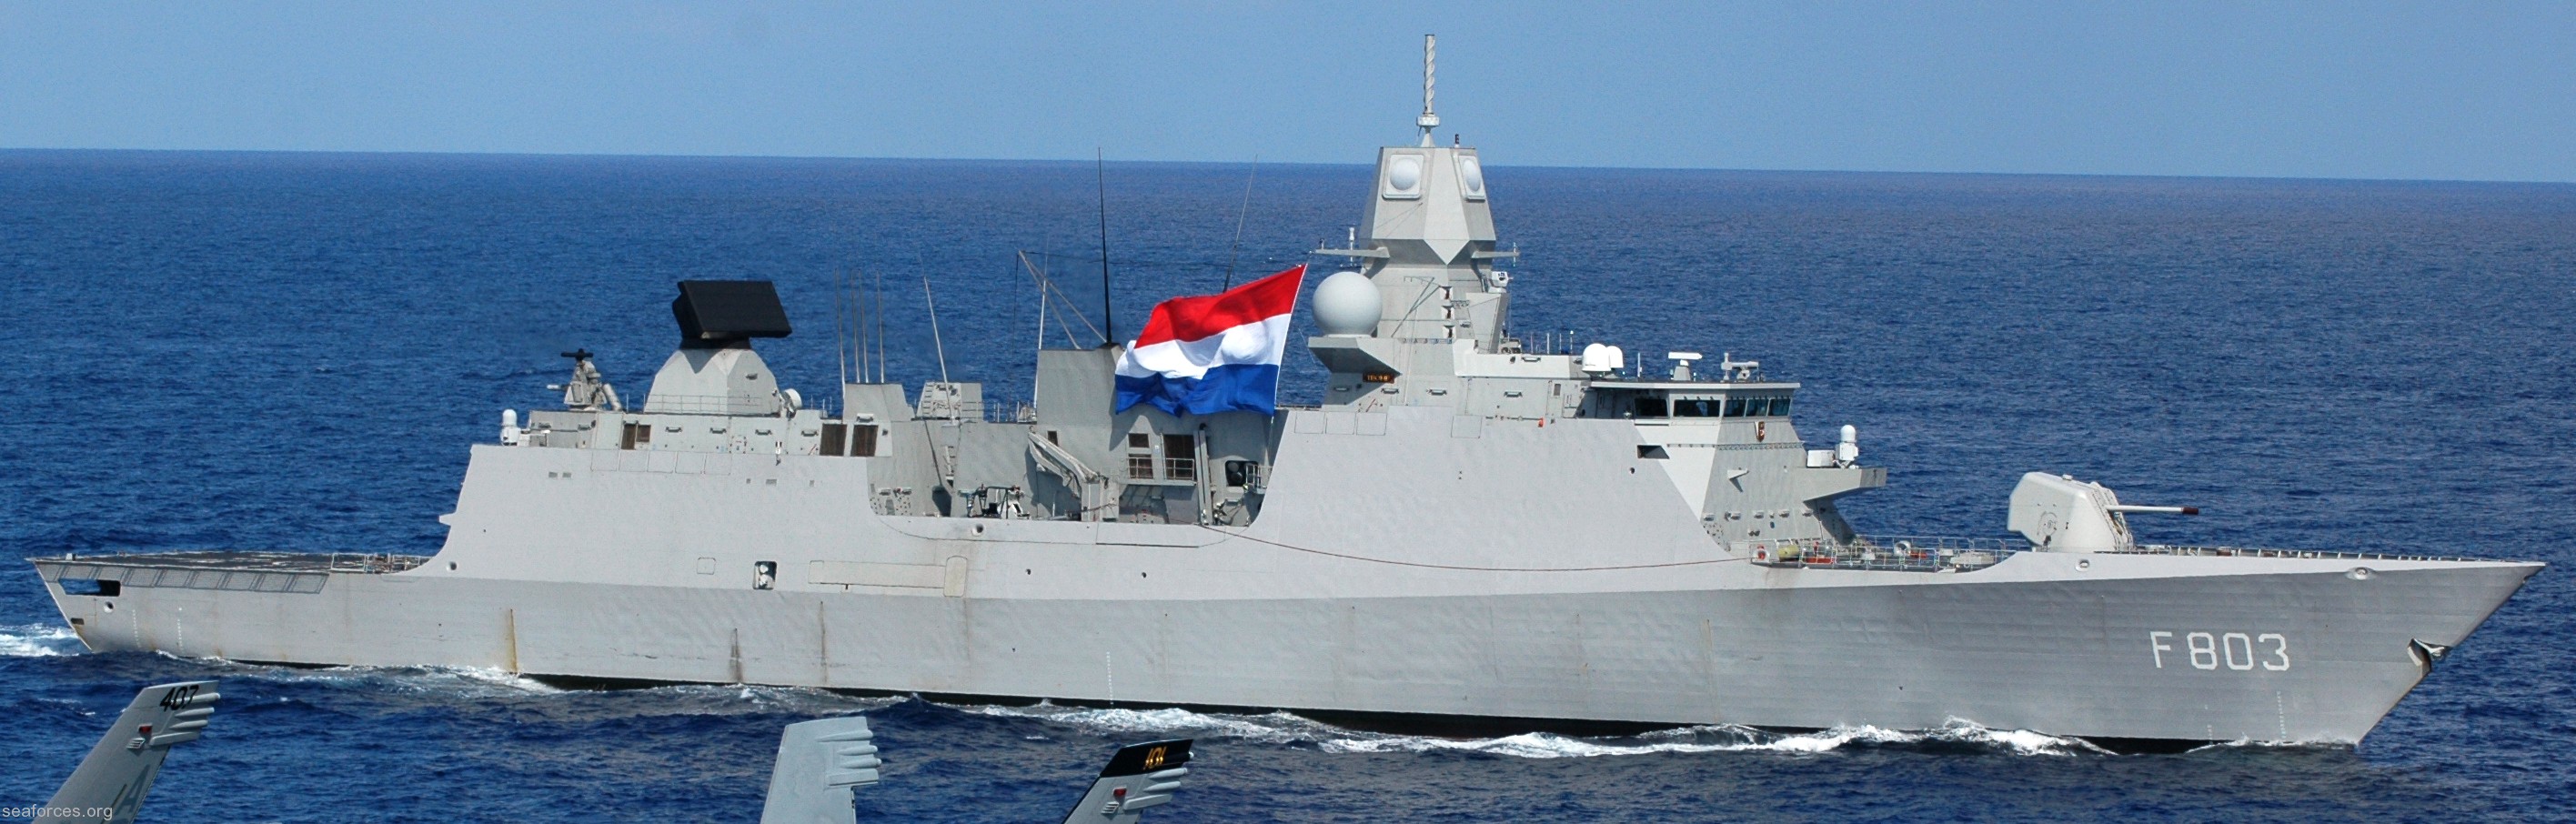 f-803 hnlms tromp guided missile frigate ffg air defense lcf royal netherlands navy 18